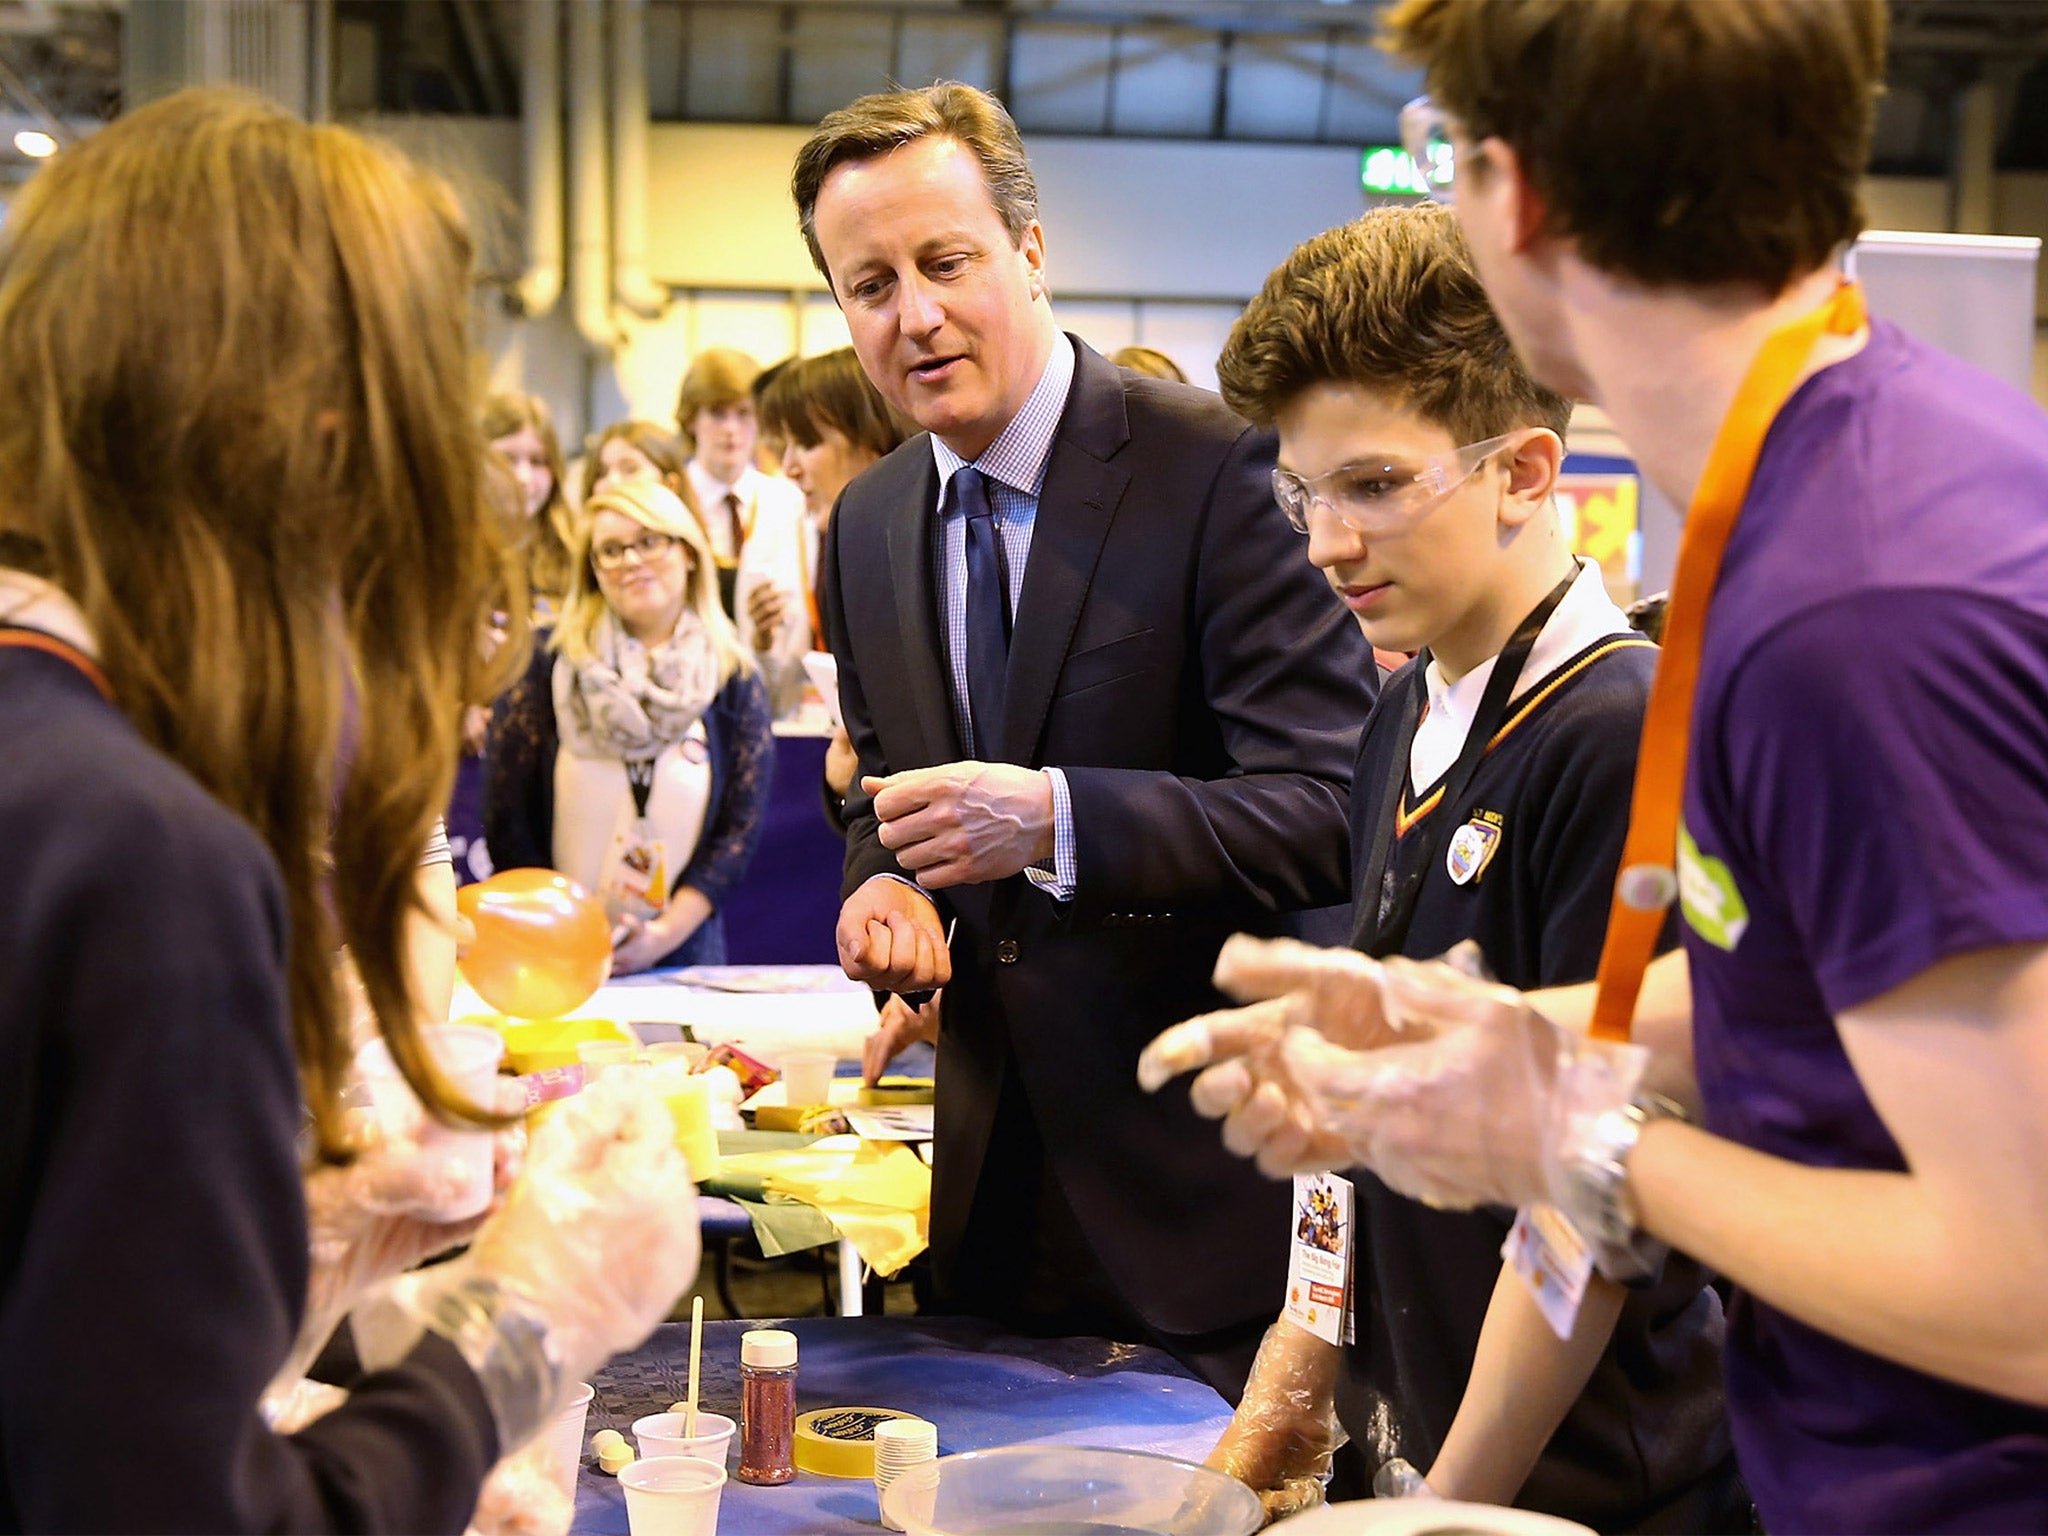 David Cameron visited the The Big Bang UK Young Scientists and Engineers Fair at the NEC in Birmingham on Wednesday